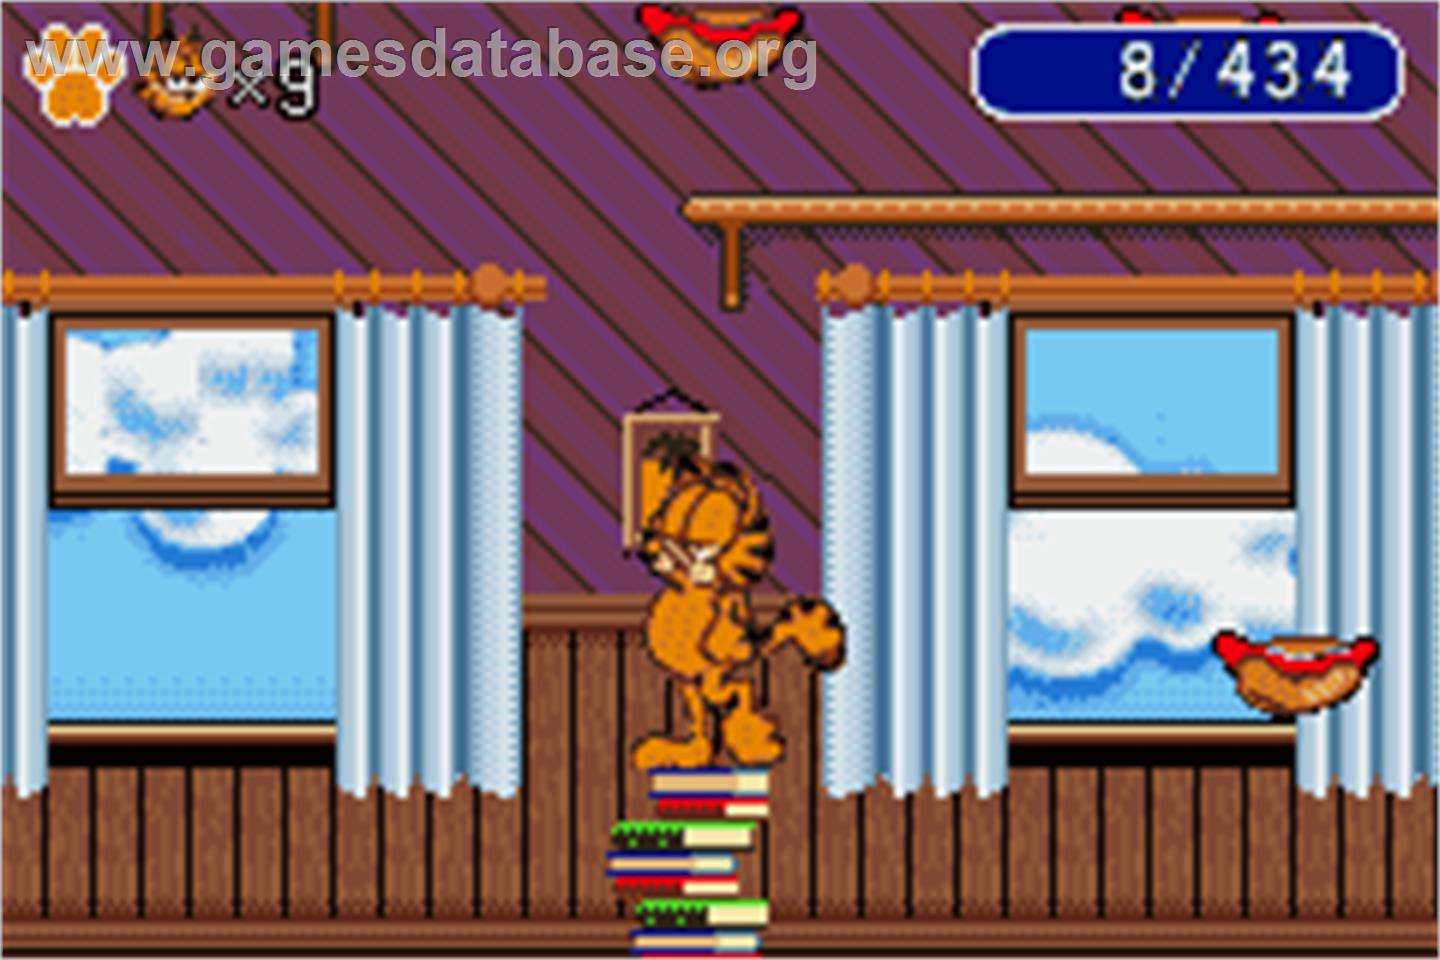 Garfield: The Search for Pooky - Nintendo Game Boy Advance - Artwork - In Game